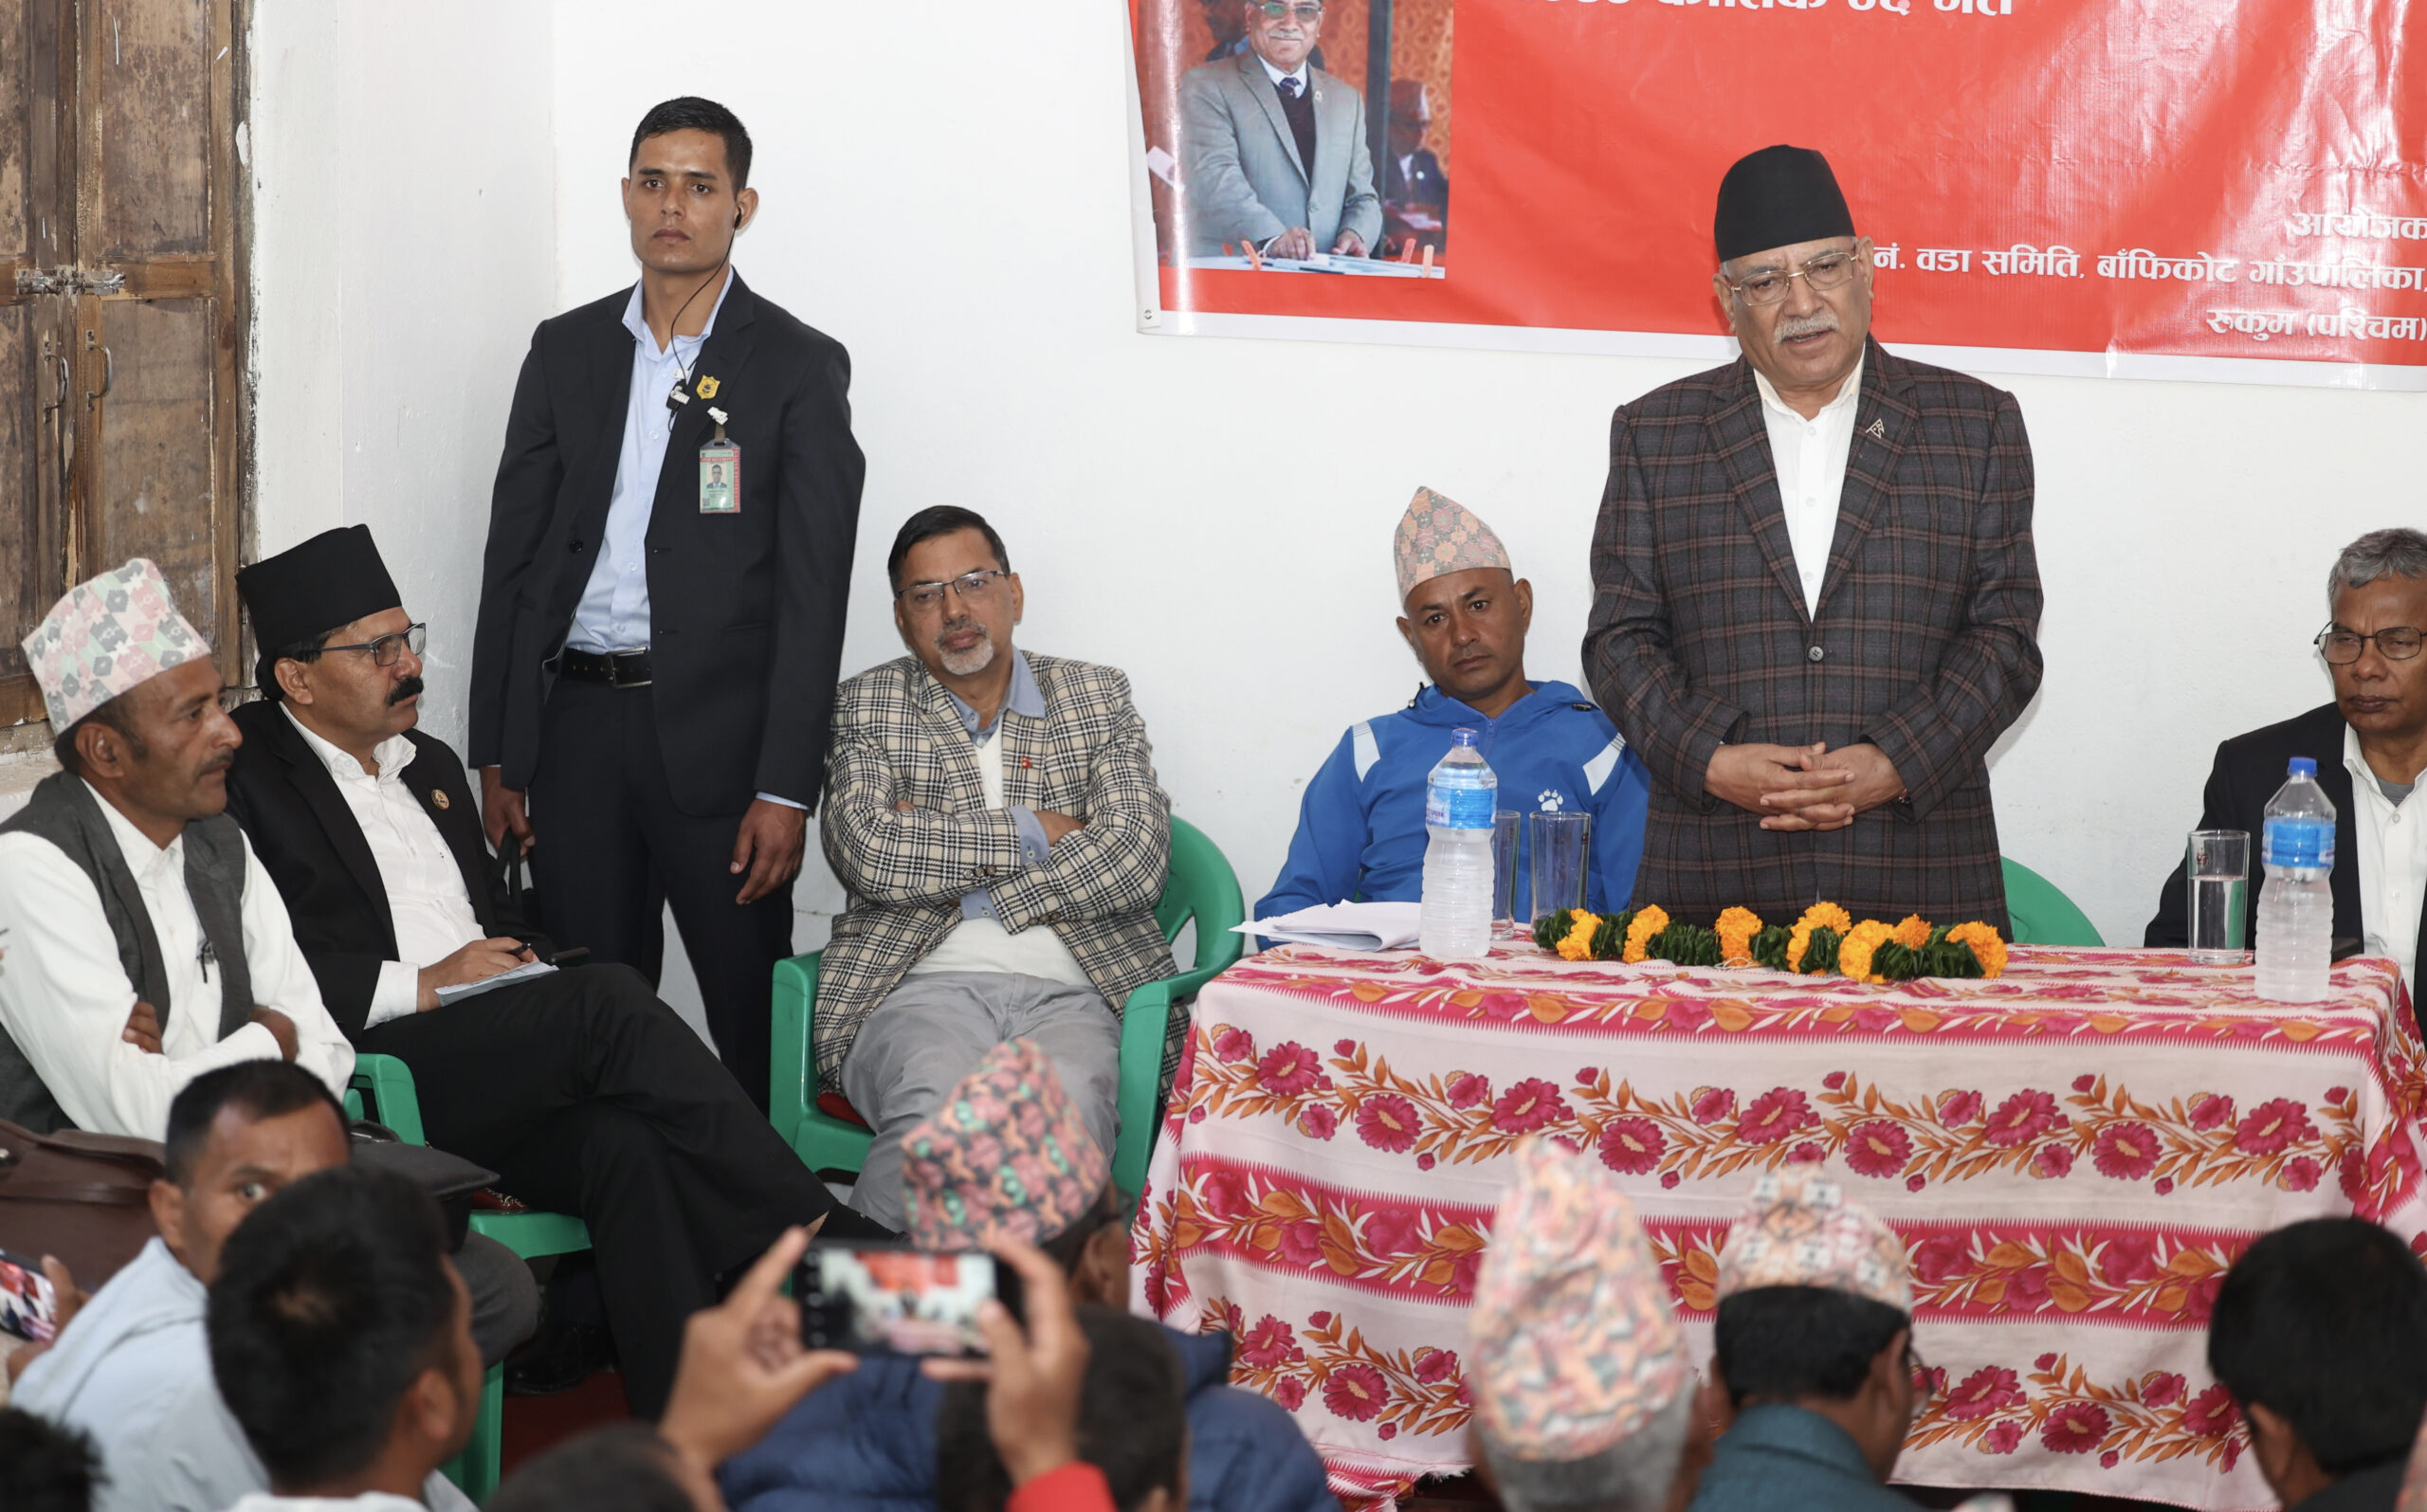 PM Dahal insists on unity among Maoist factions